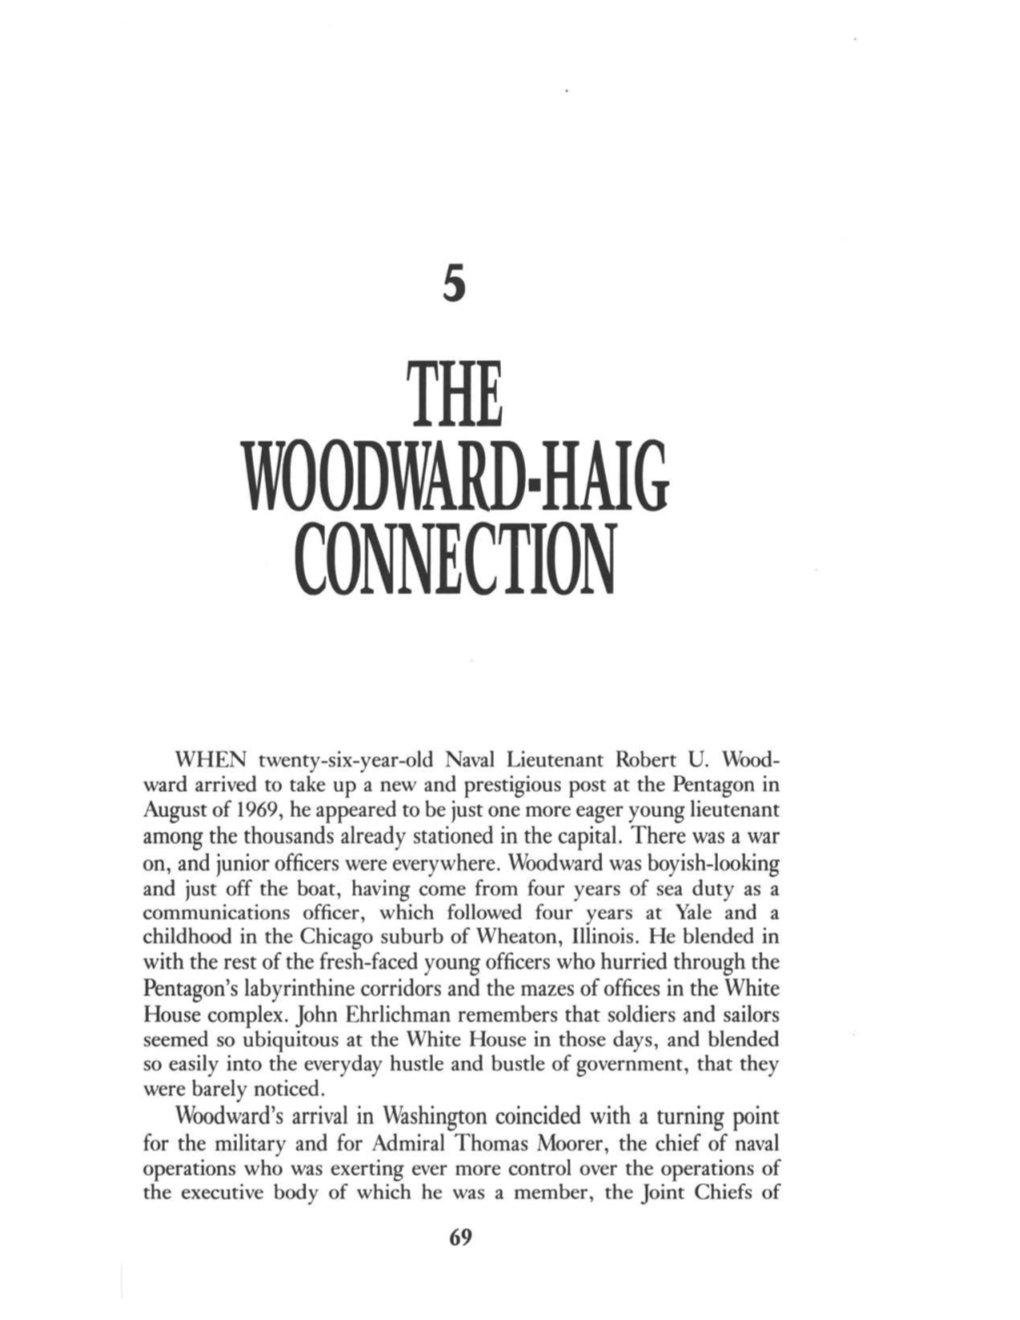 The Woodward-Haig Connection